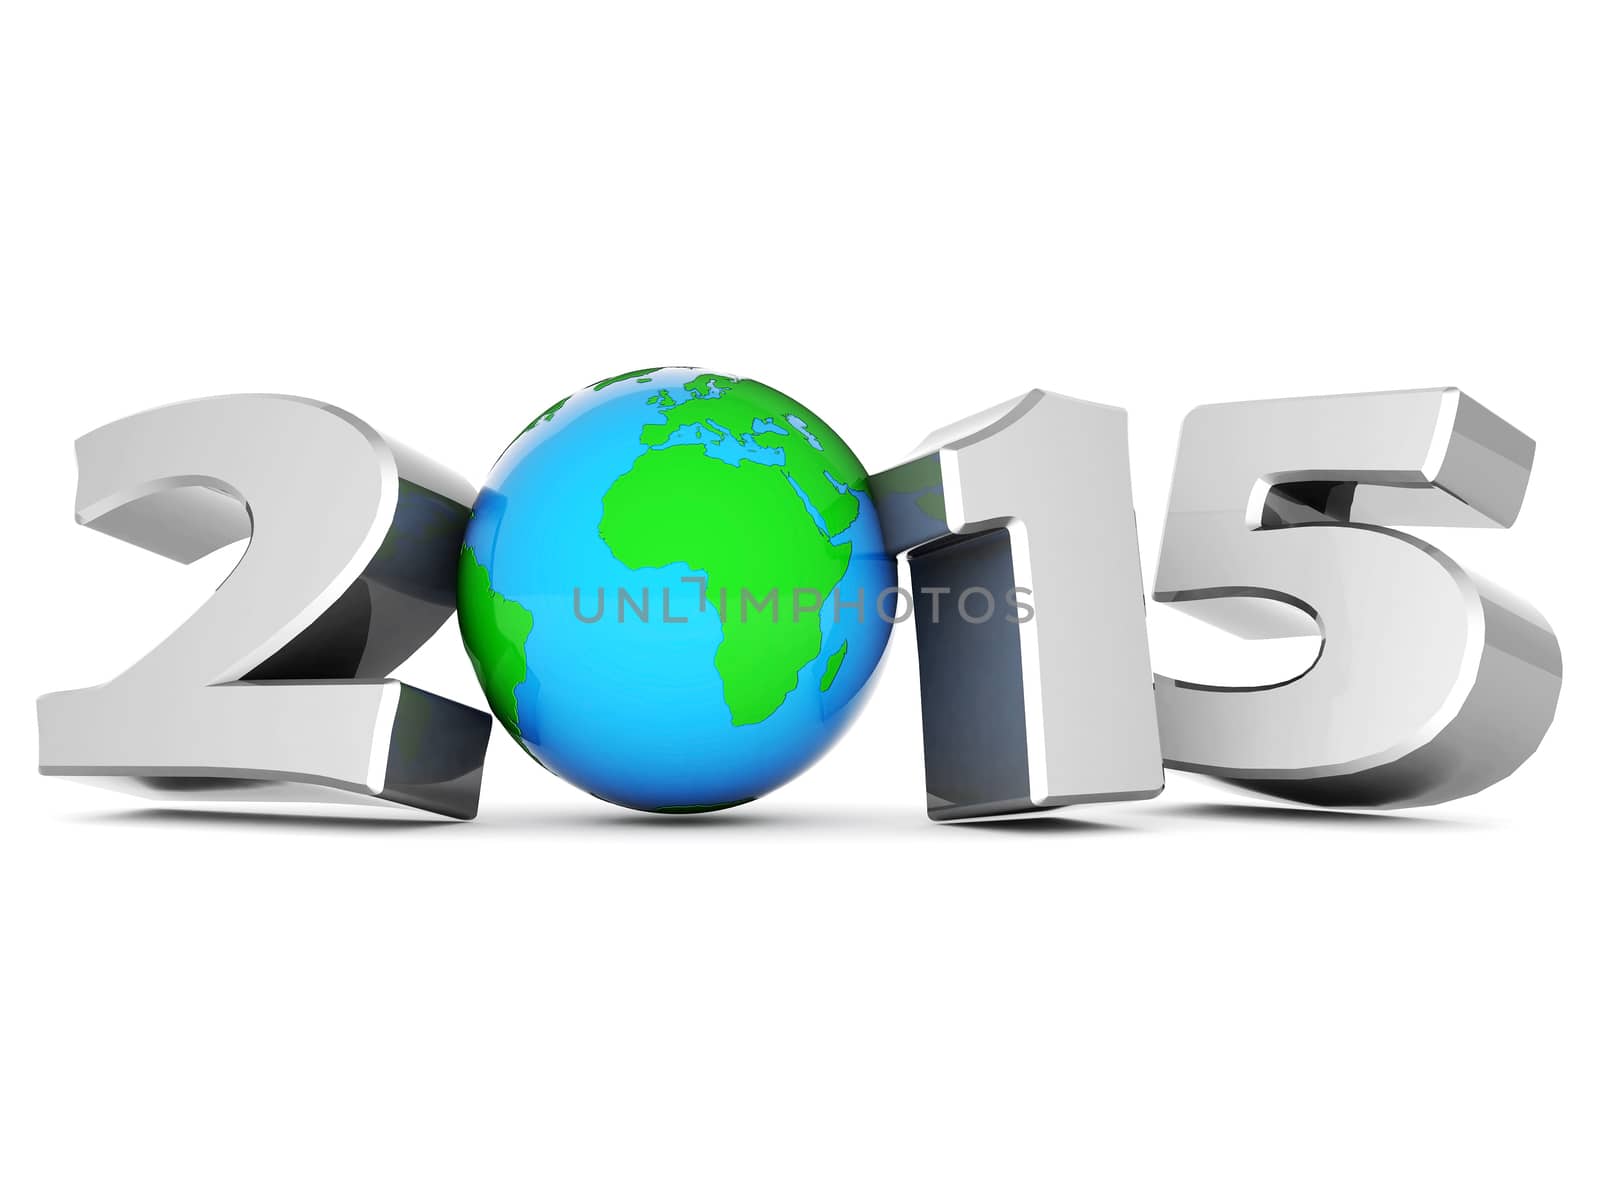 happy new year 2015 Illustrations 3d on a white background